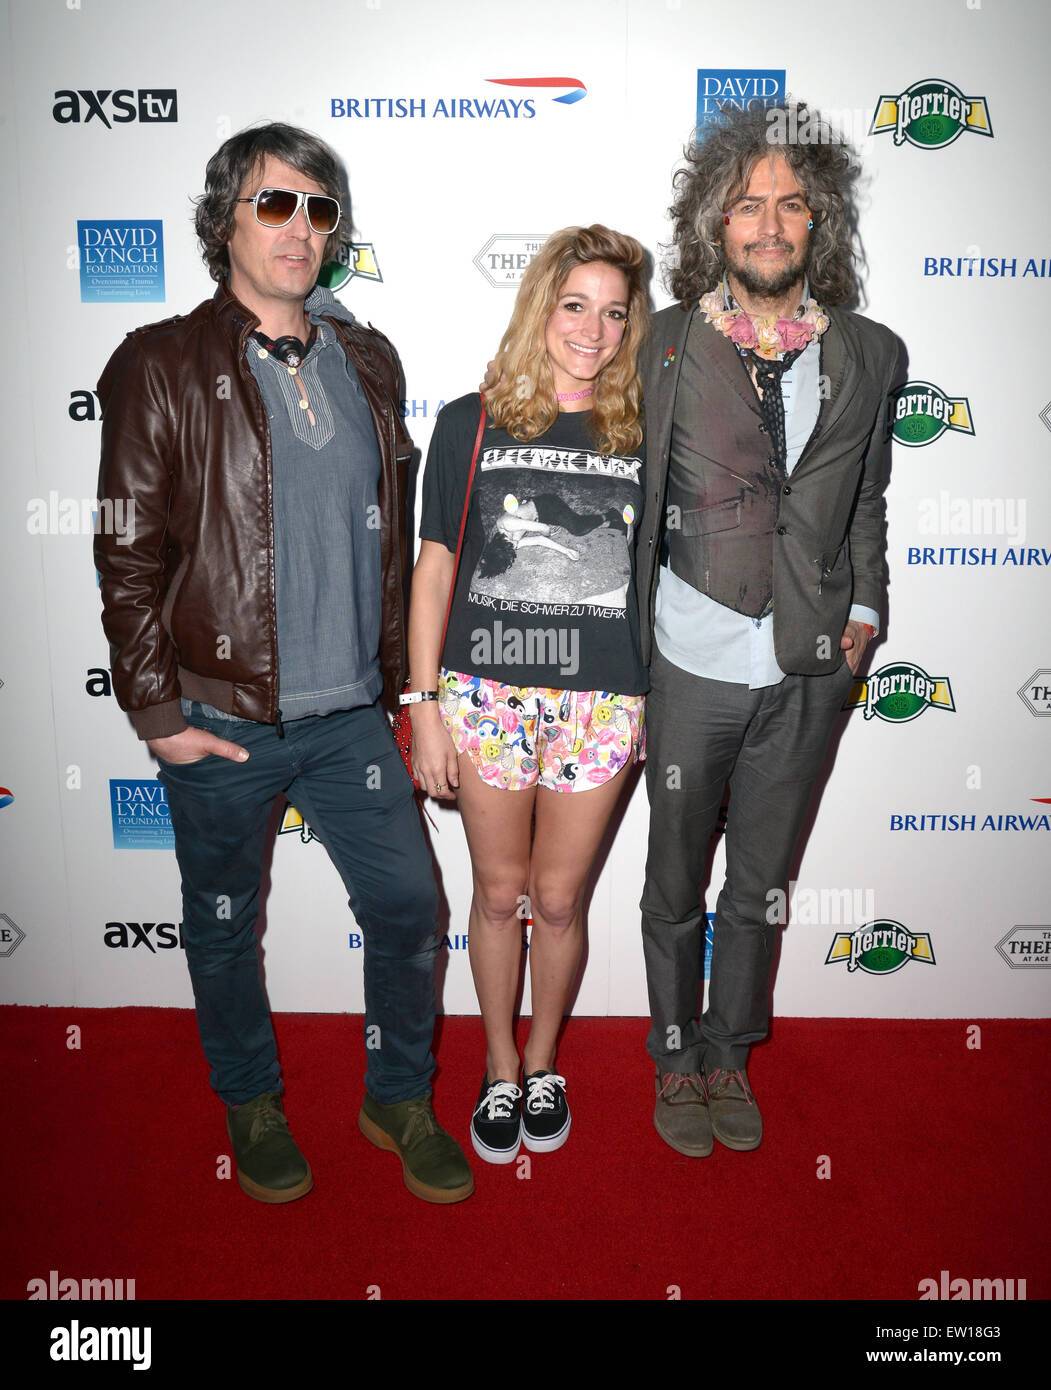 The David Lynch Foundation's DLF Live presents 'The Music Of David Lynch' at The Theatre at Ace Hotel - Arrivals  Featuring: Wayne Coyne, Katy Weaver, Steven Drozd, The Flaming Lips Where: Los Angeles, California, United States When: 01 Apr 2015 C Stock Photo